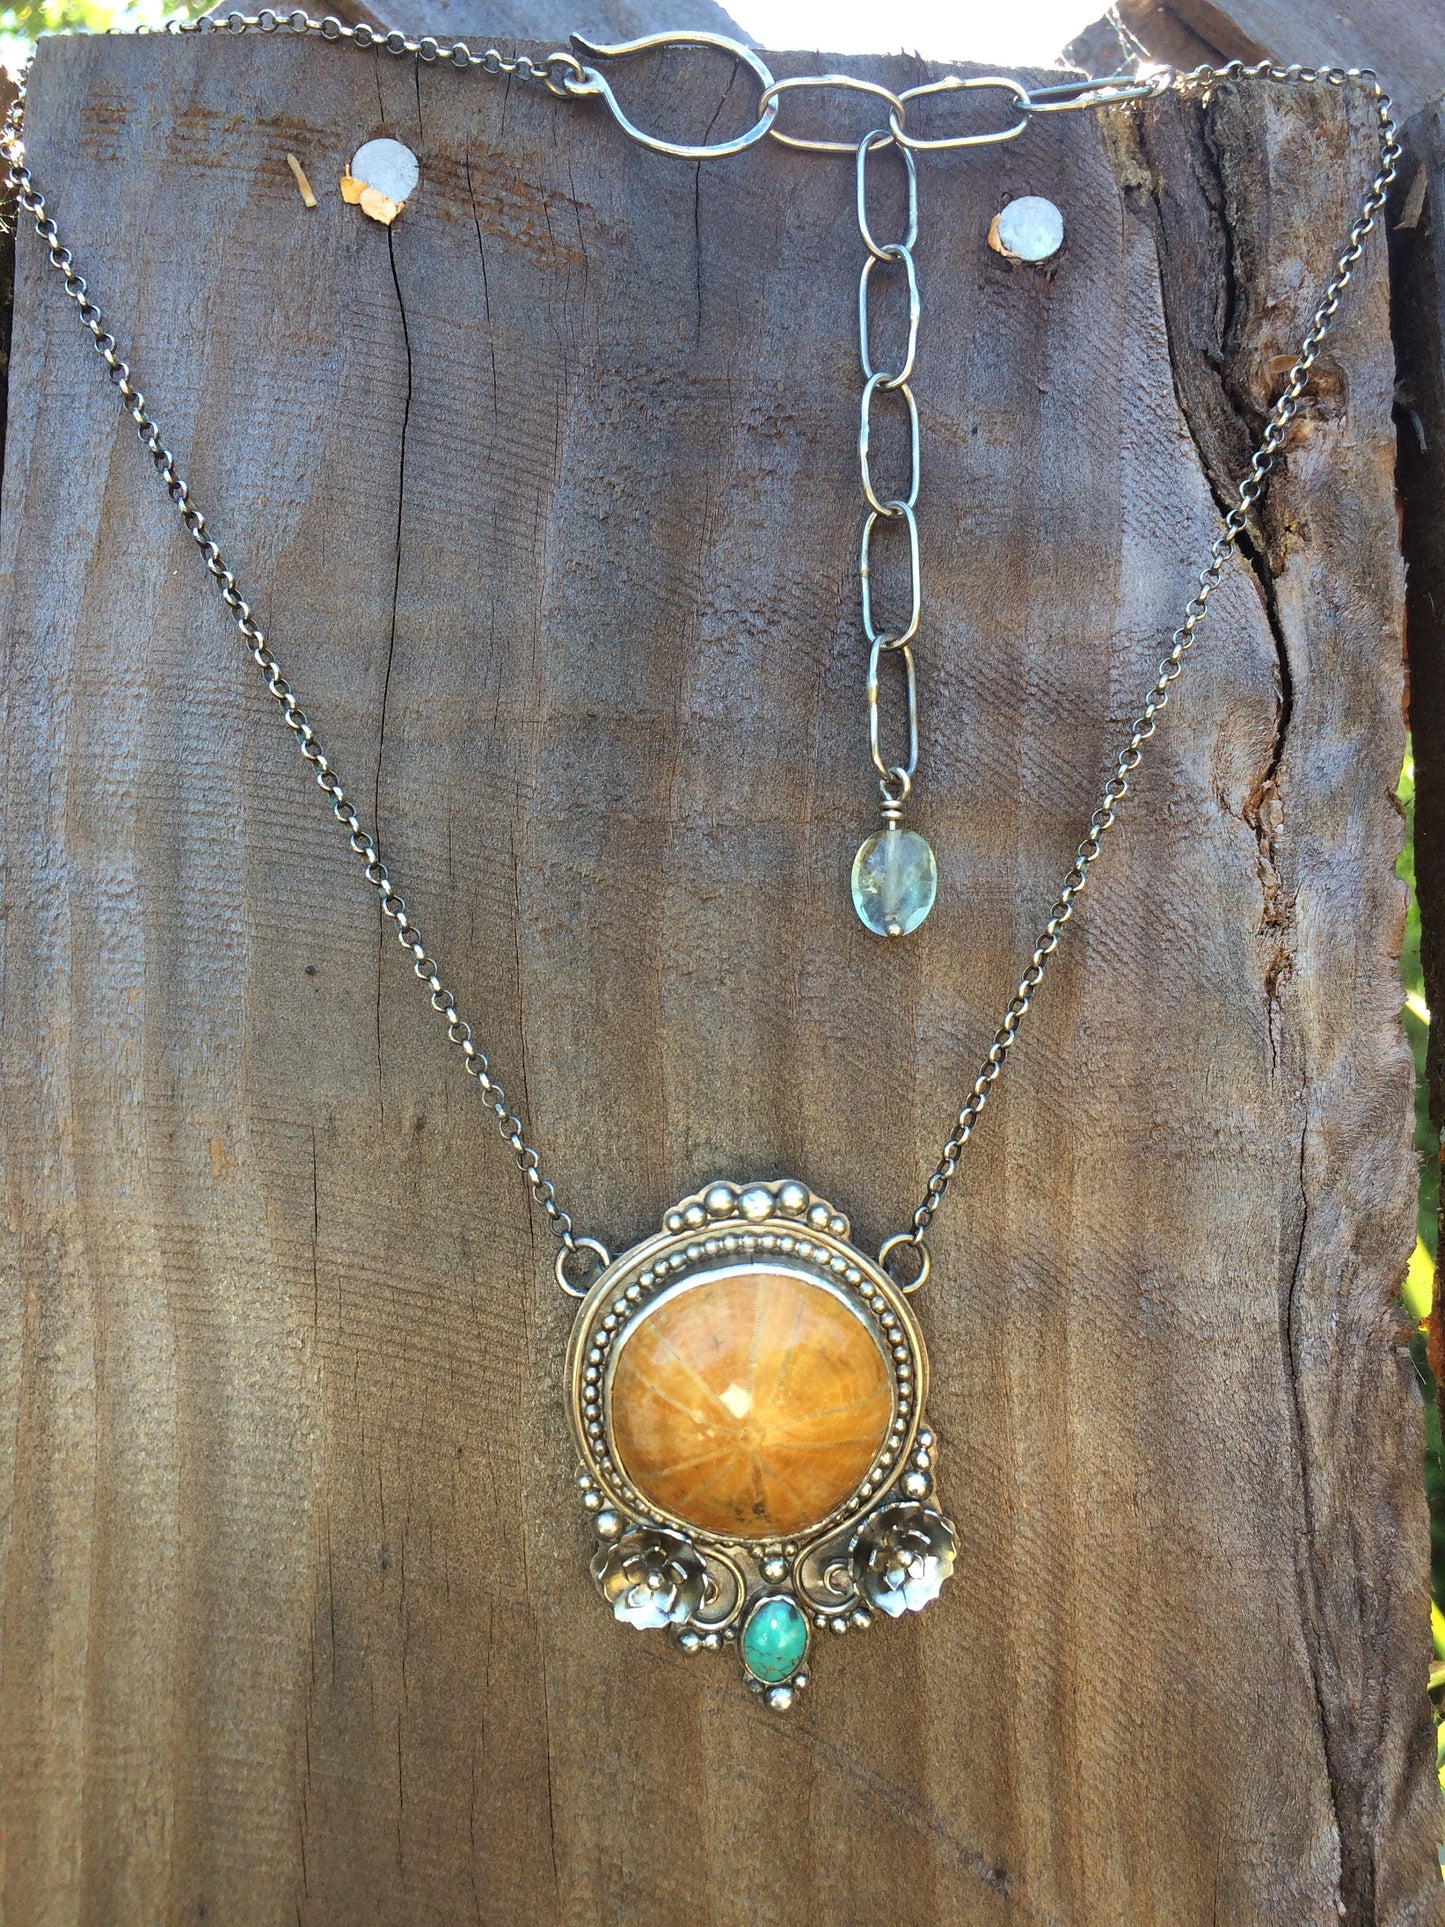 Fossilized Sea Urchin & Turquoise Flower Necklace in Sterling Silver